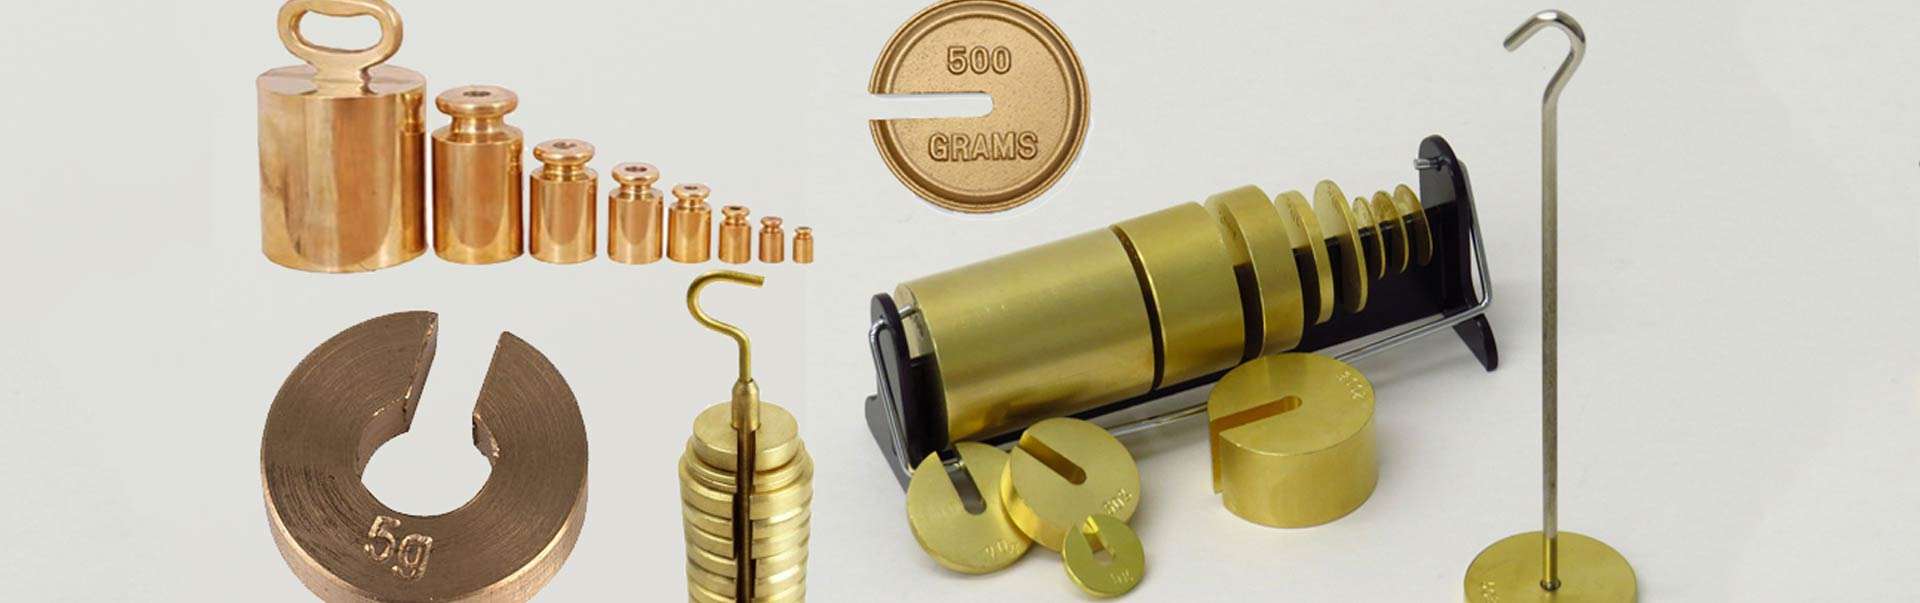 Test Weights Manufacturers in mangalore